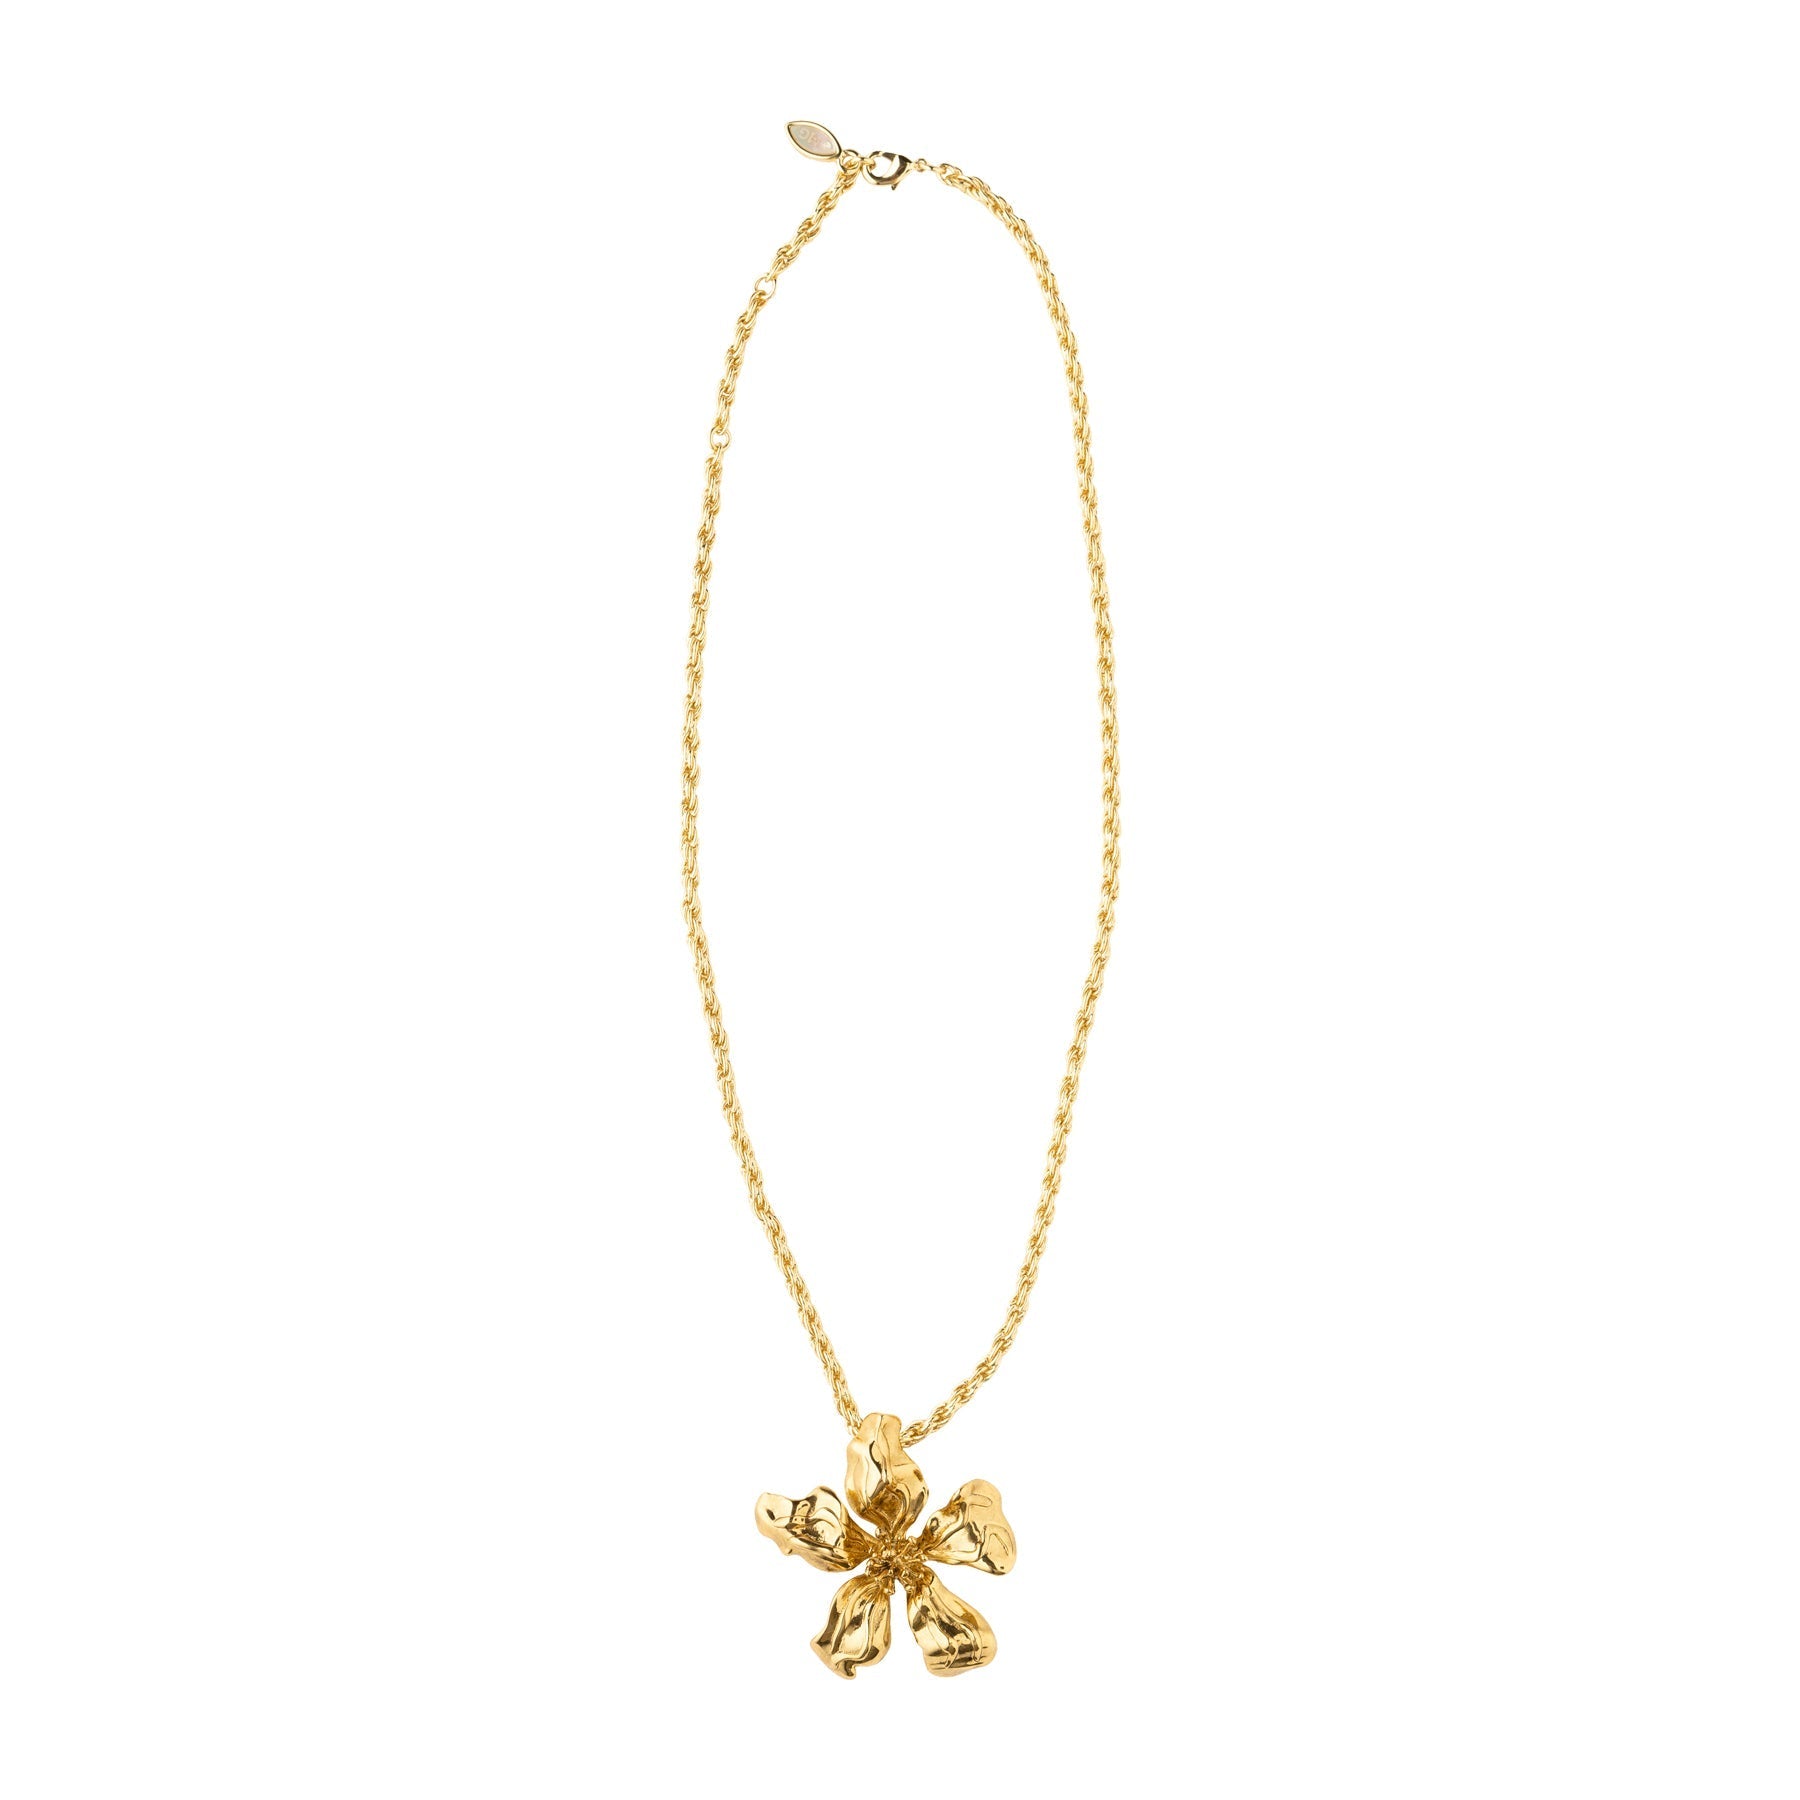 Gold Flower Pendant Necklace on White Background